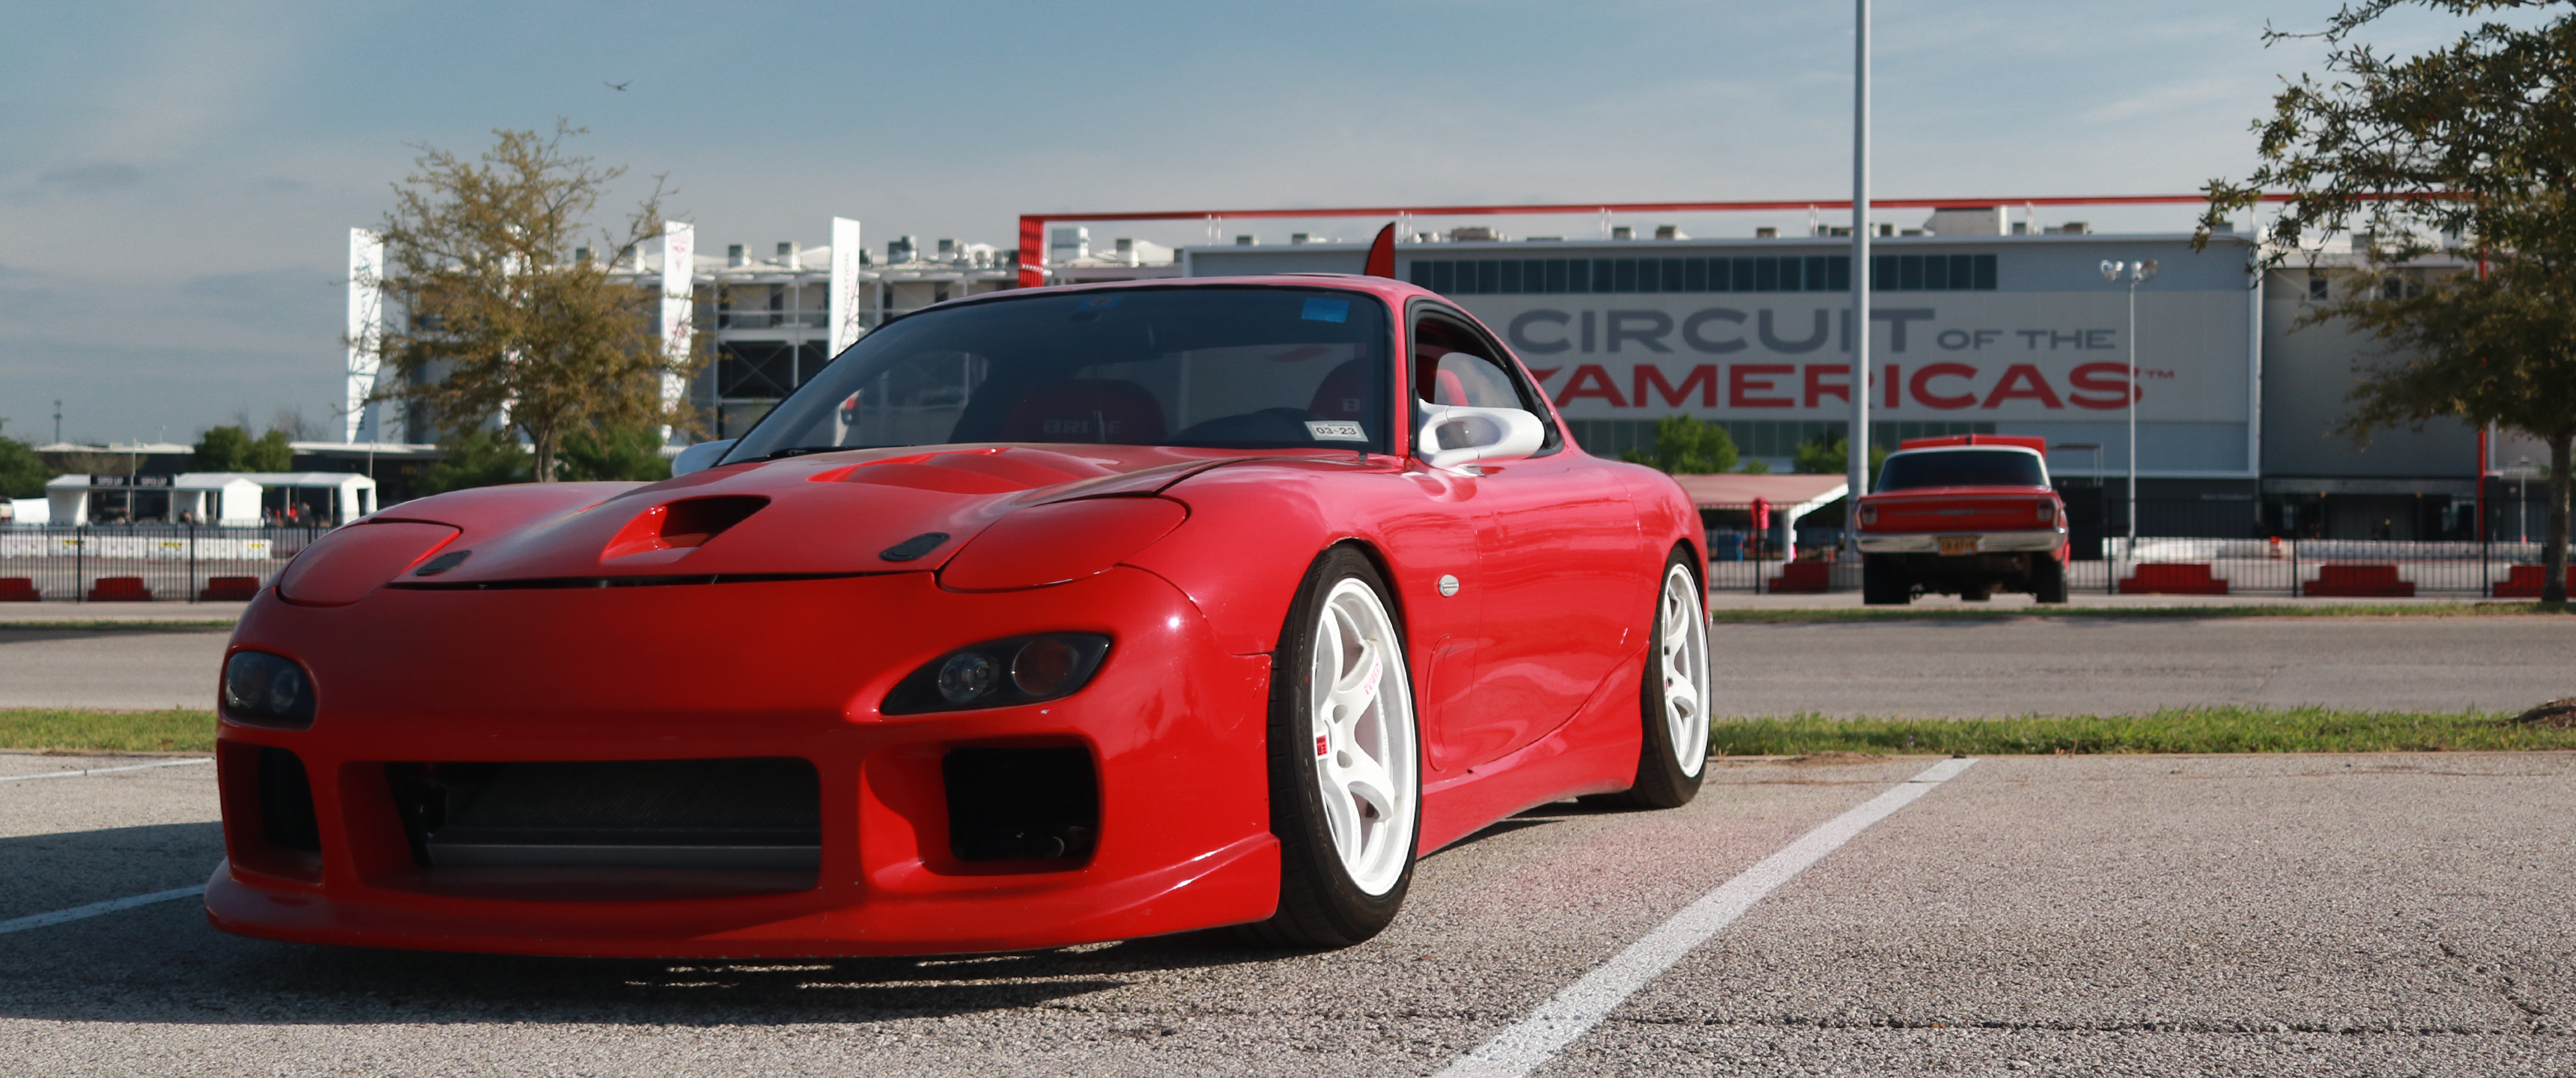 General 3440x1440 car stance (cars) red cars frontal view